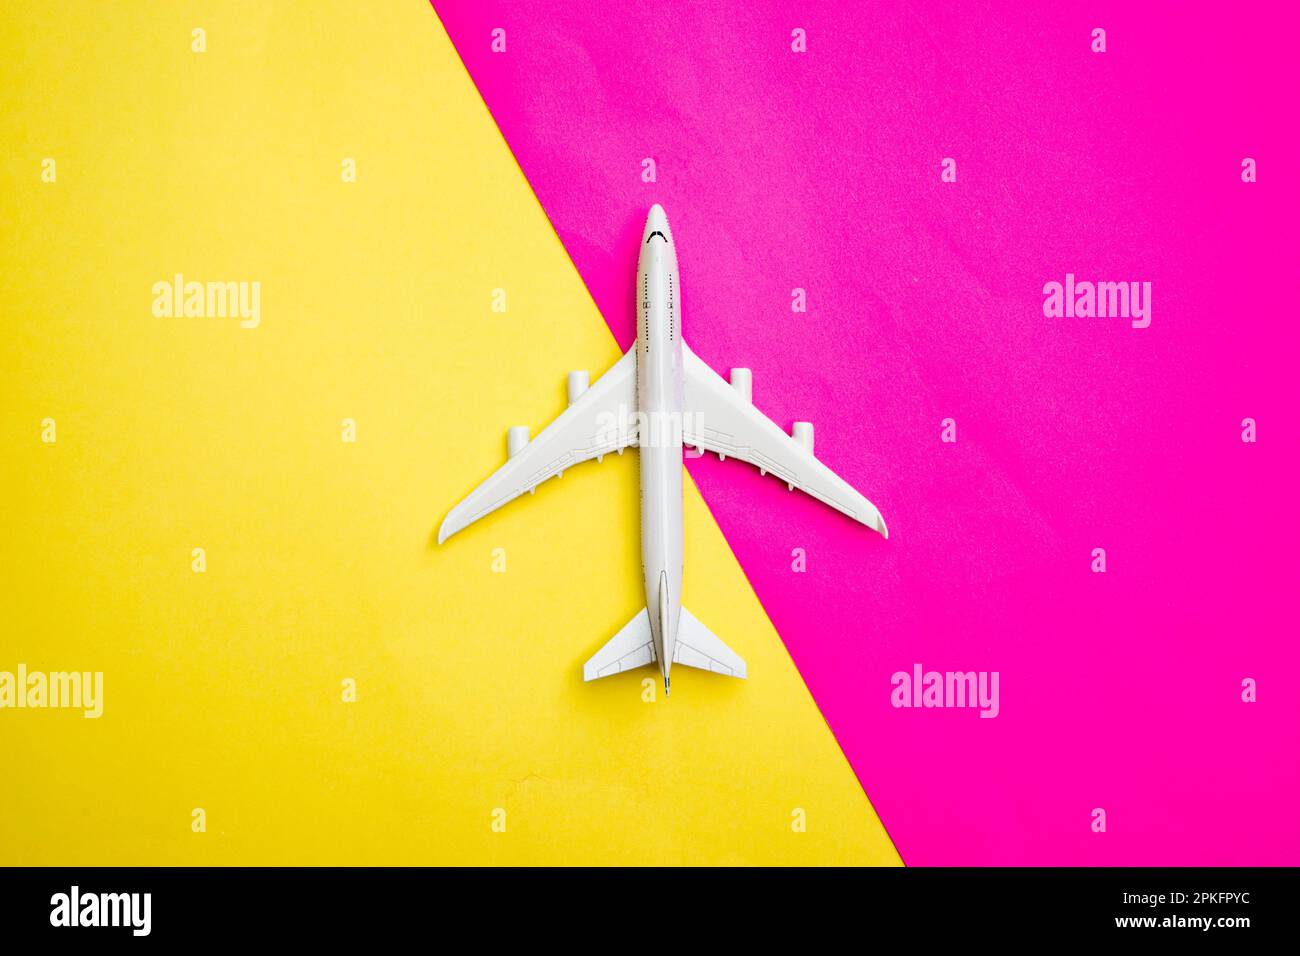 Simple Geometric Technology Light Plane Material Background Wallpaper Image  For Free Download - Pngtree